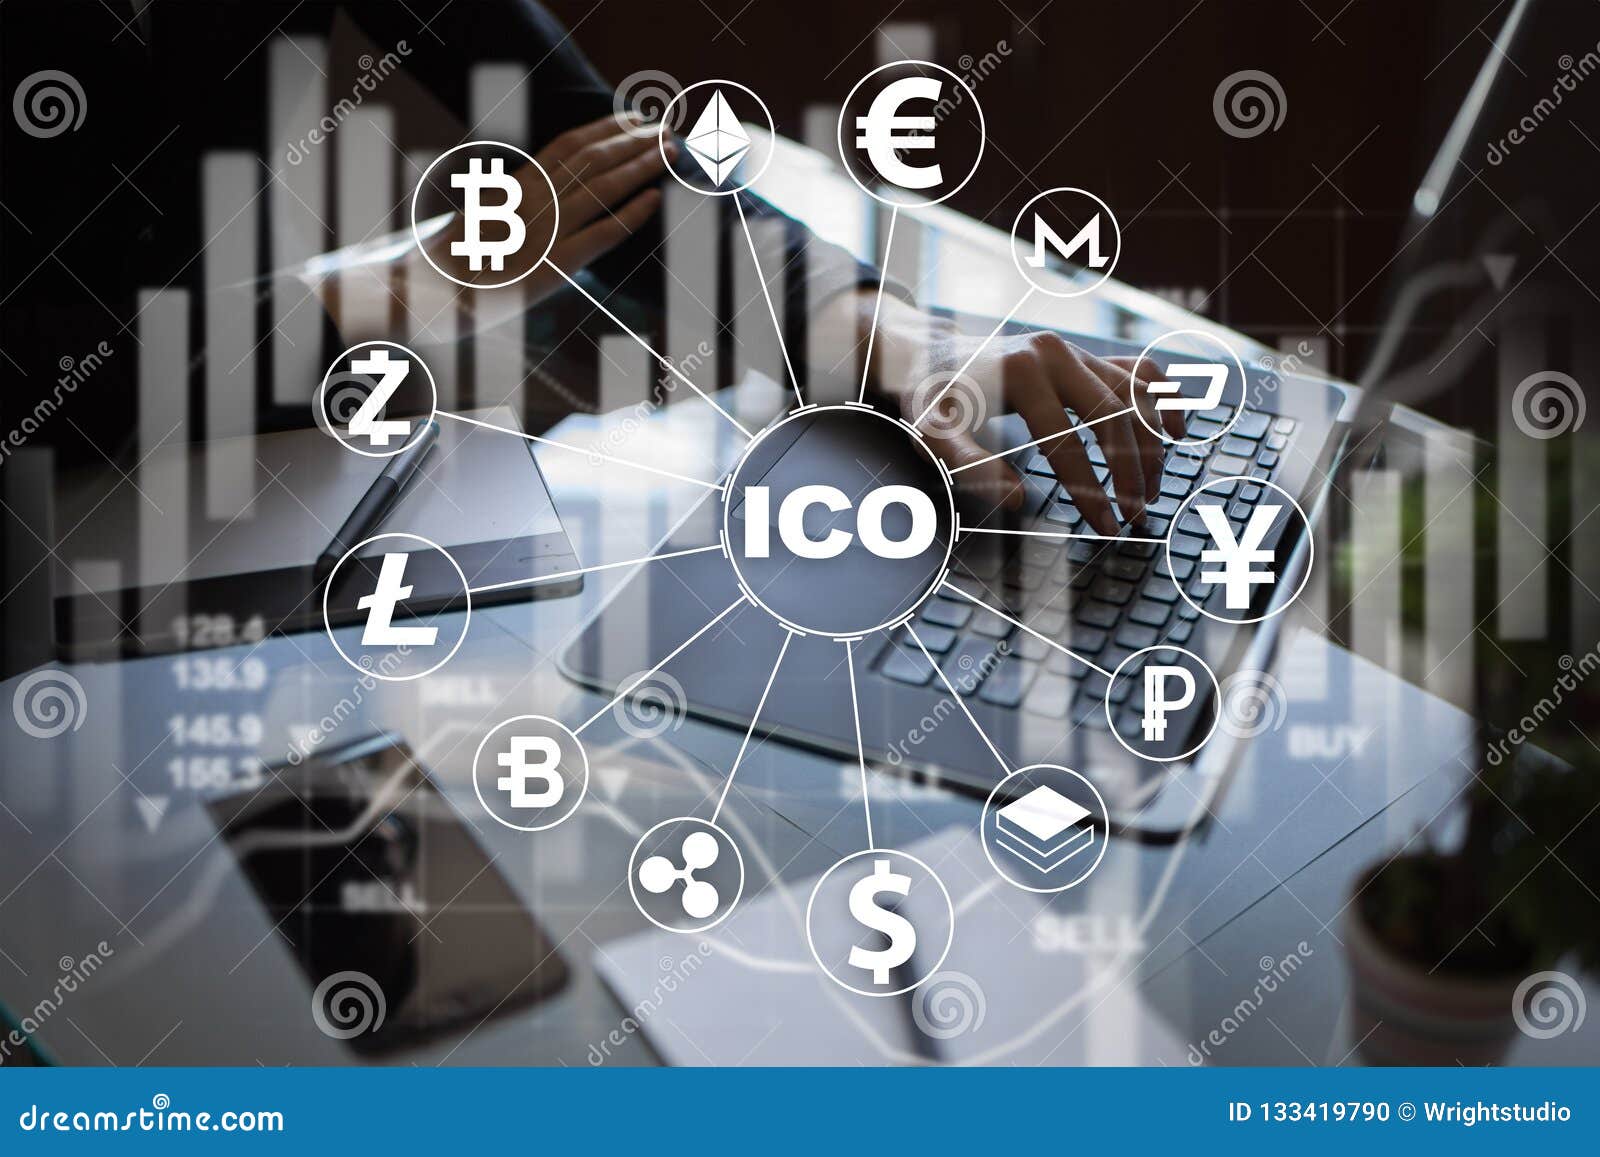 ico cryptocurrency buy